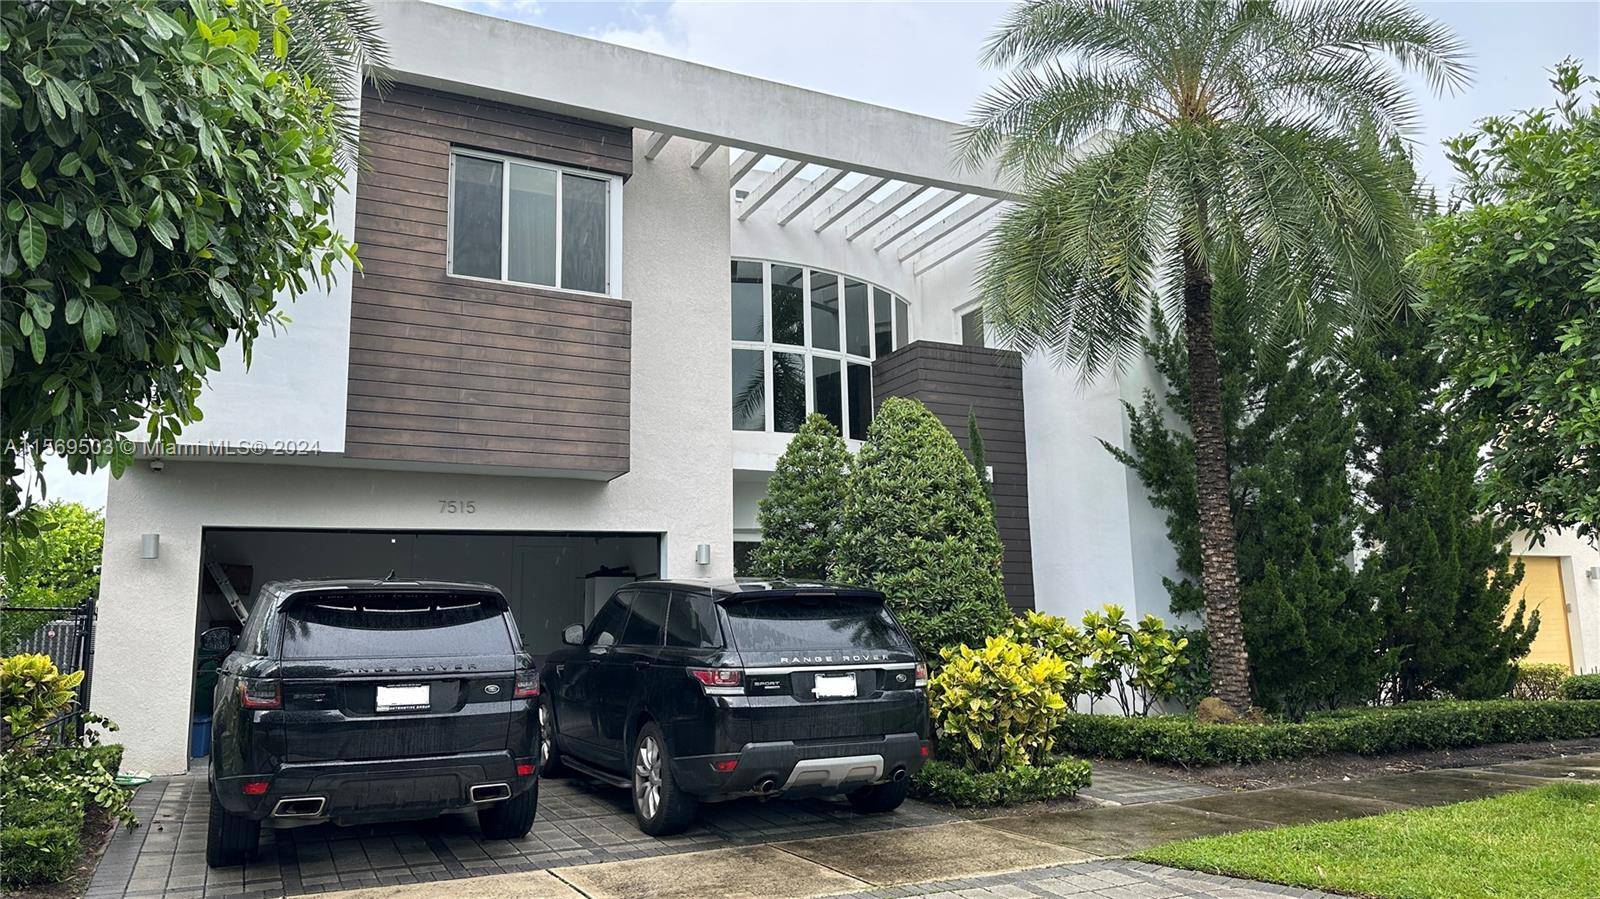 The Property is Located in the vibrant Gated Modern 60 community in Doral, this luxurious 6 bedroom, 7 bath home is the epitome of sophistication.